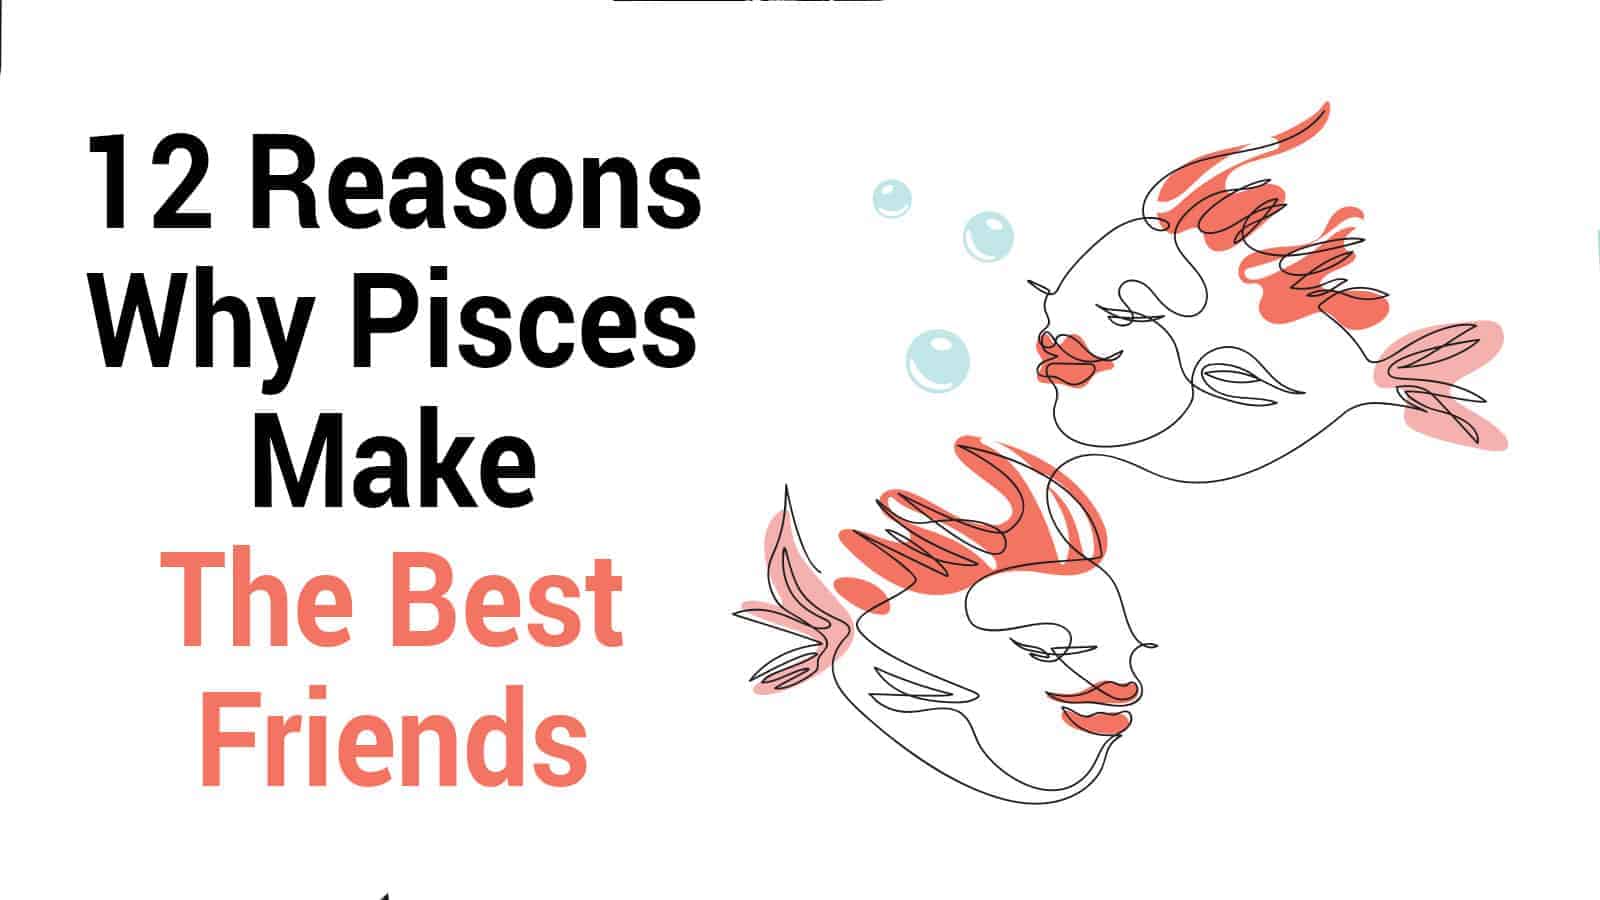 12 Reasons Why Pisces Make The Best Friends